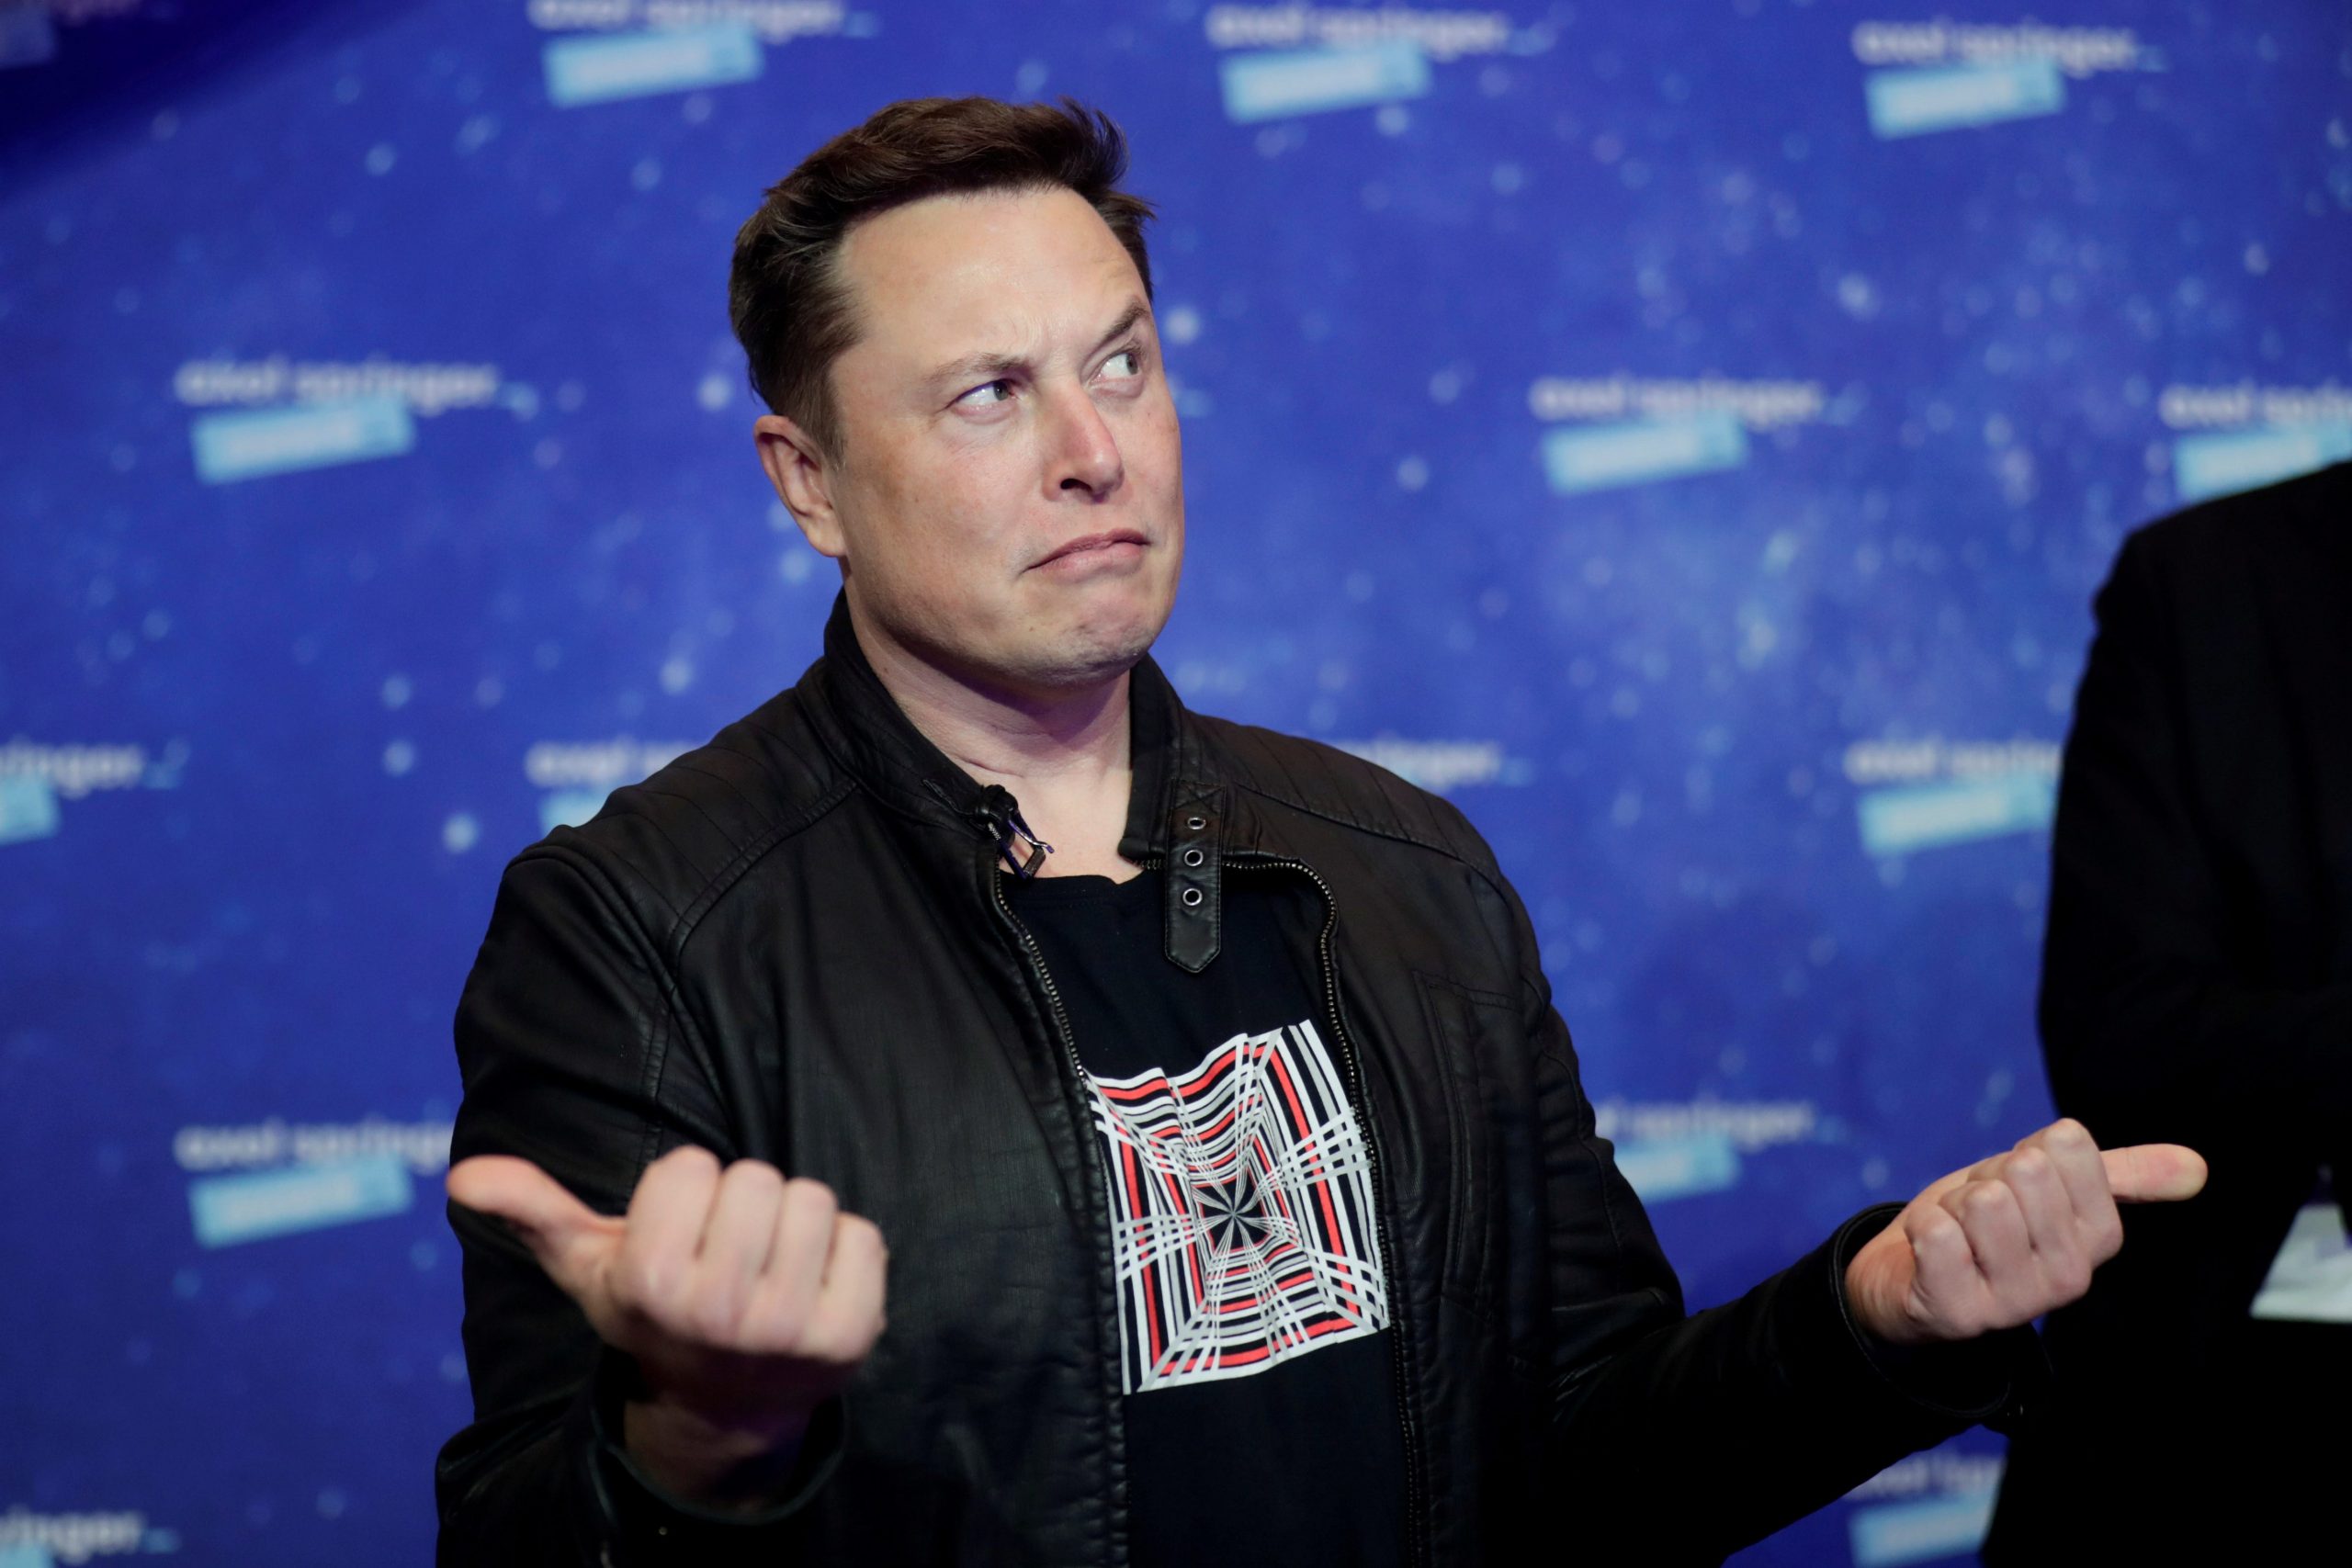 SpaceX owner and Tesla CEO Elon Musk grimaces after arriving on the red carpet for the Axel Springer award, in Berlin, Germany, December 1, 2020.